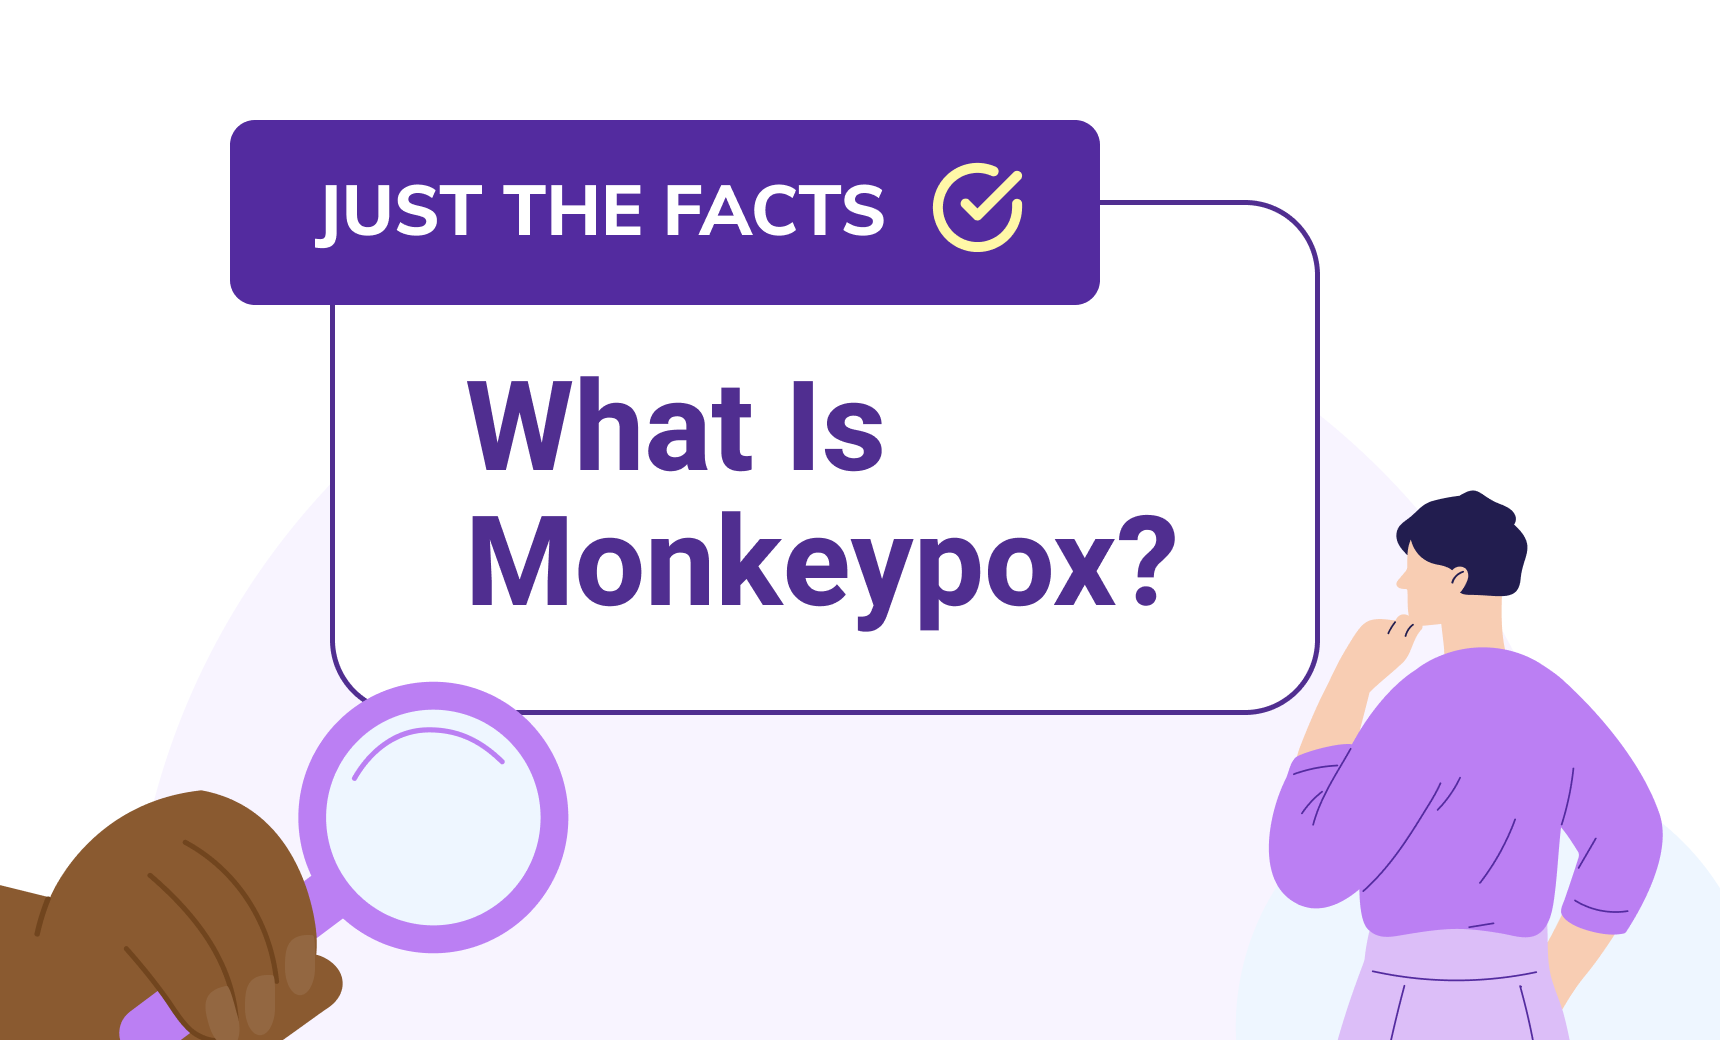 Just the Facts: Monkeypox